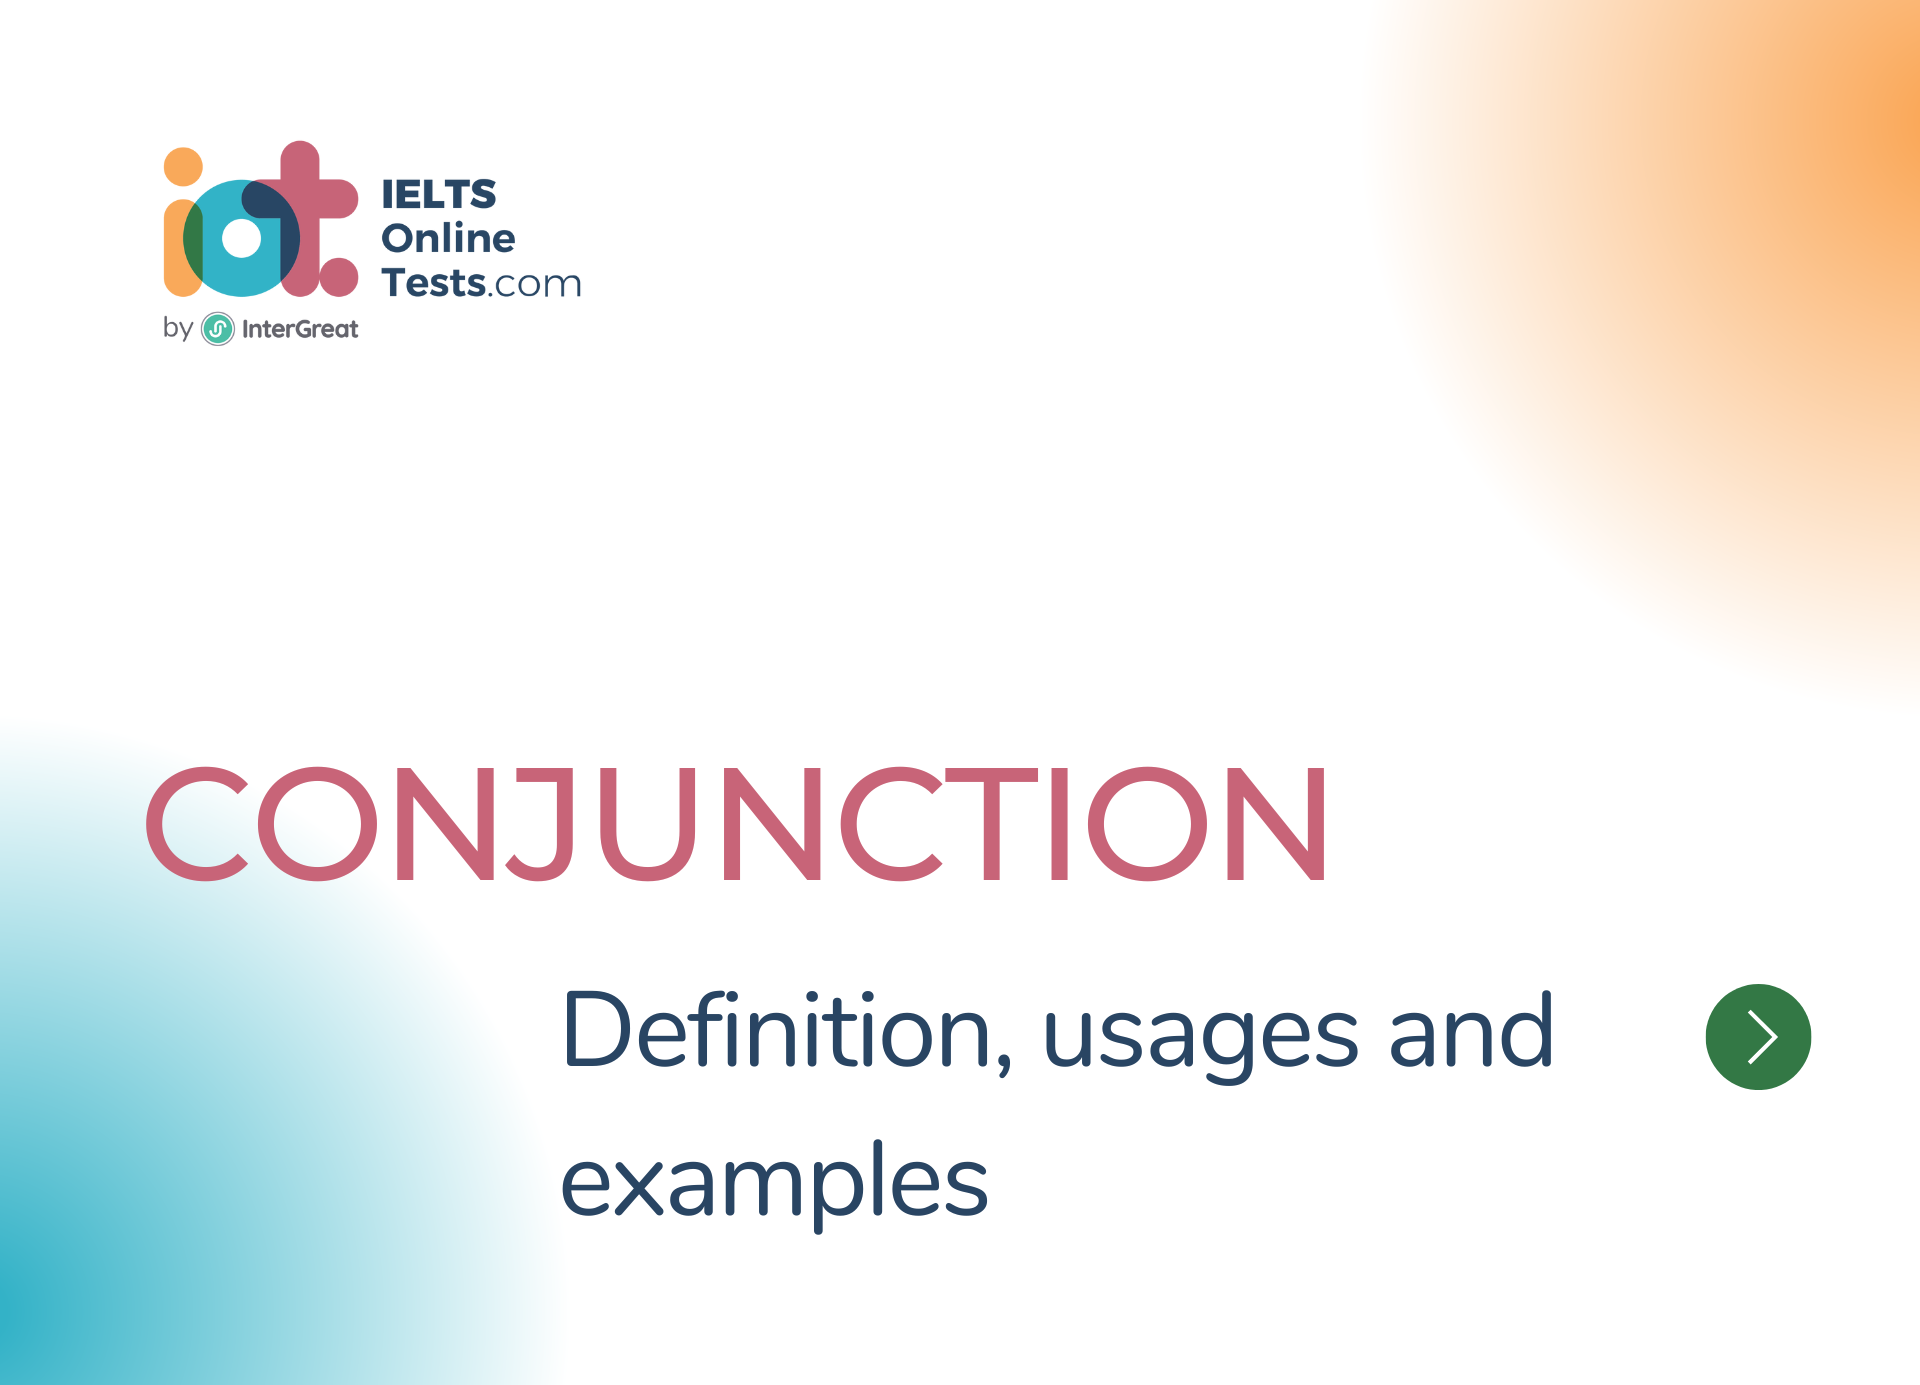 Conjunction definition, usages and examples